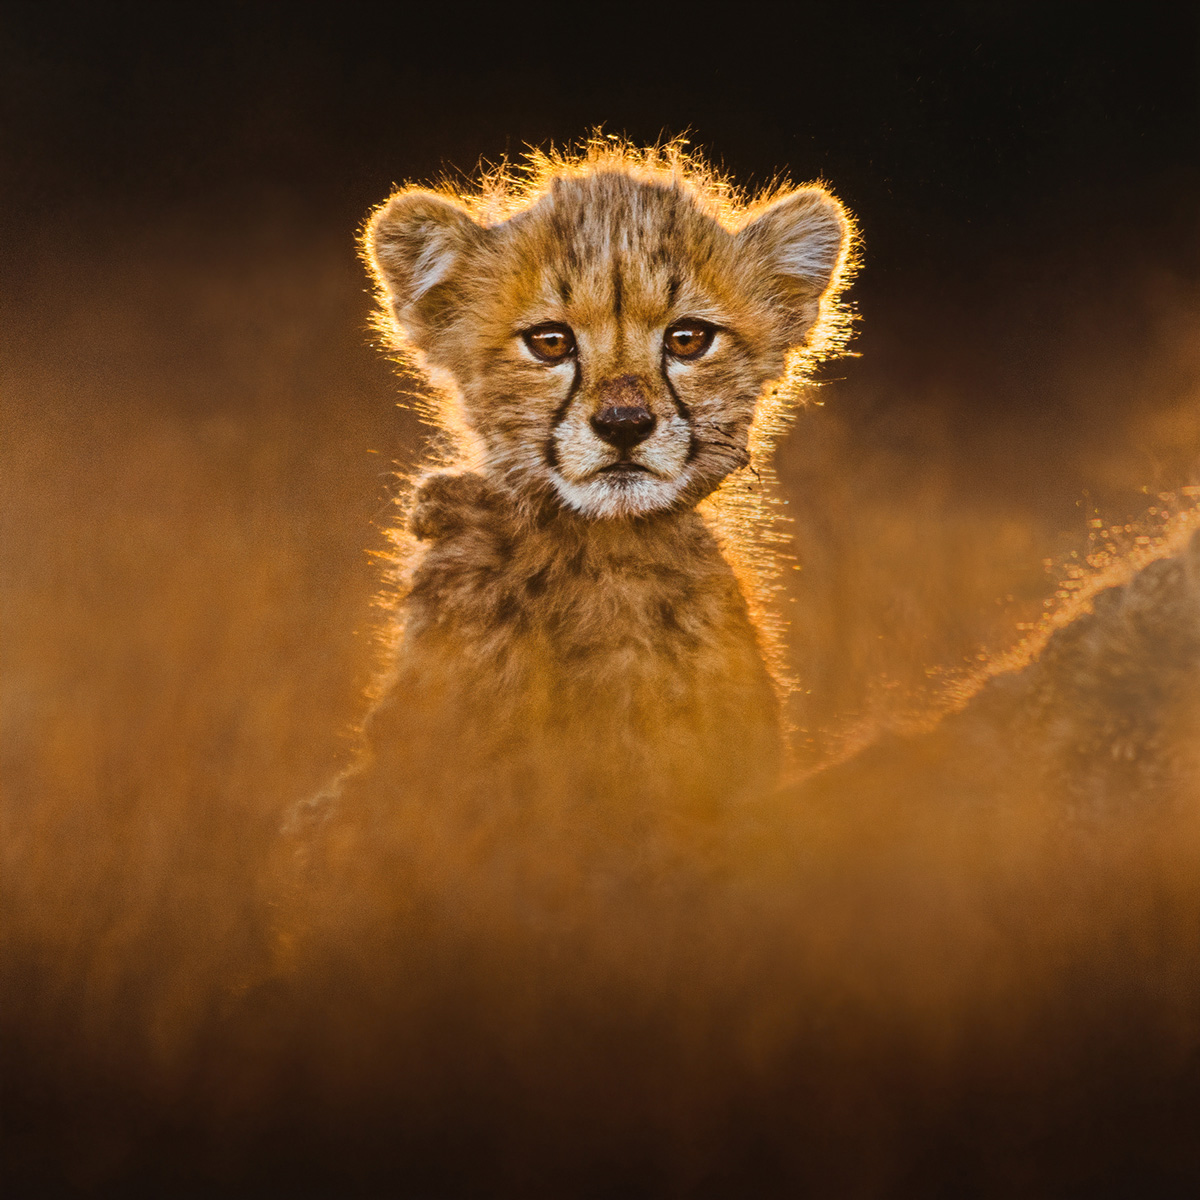 Photo of a golden colored baby cheetah with dark brown marking on its face and amber colored eyes. The baby cheetah is just visible above the haze of grass and is sitting up, staring at the camera.